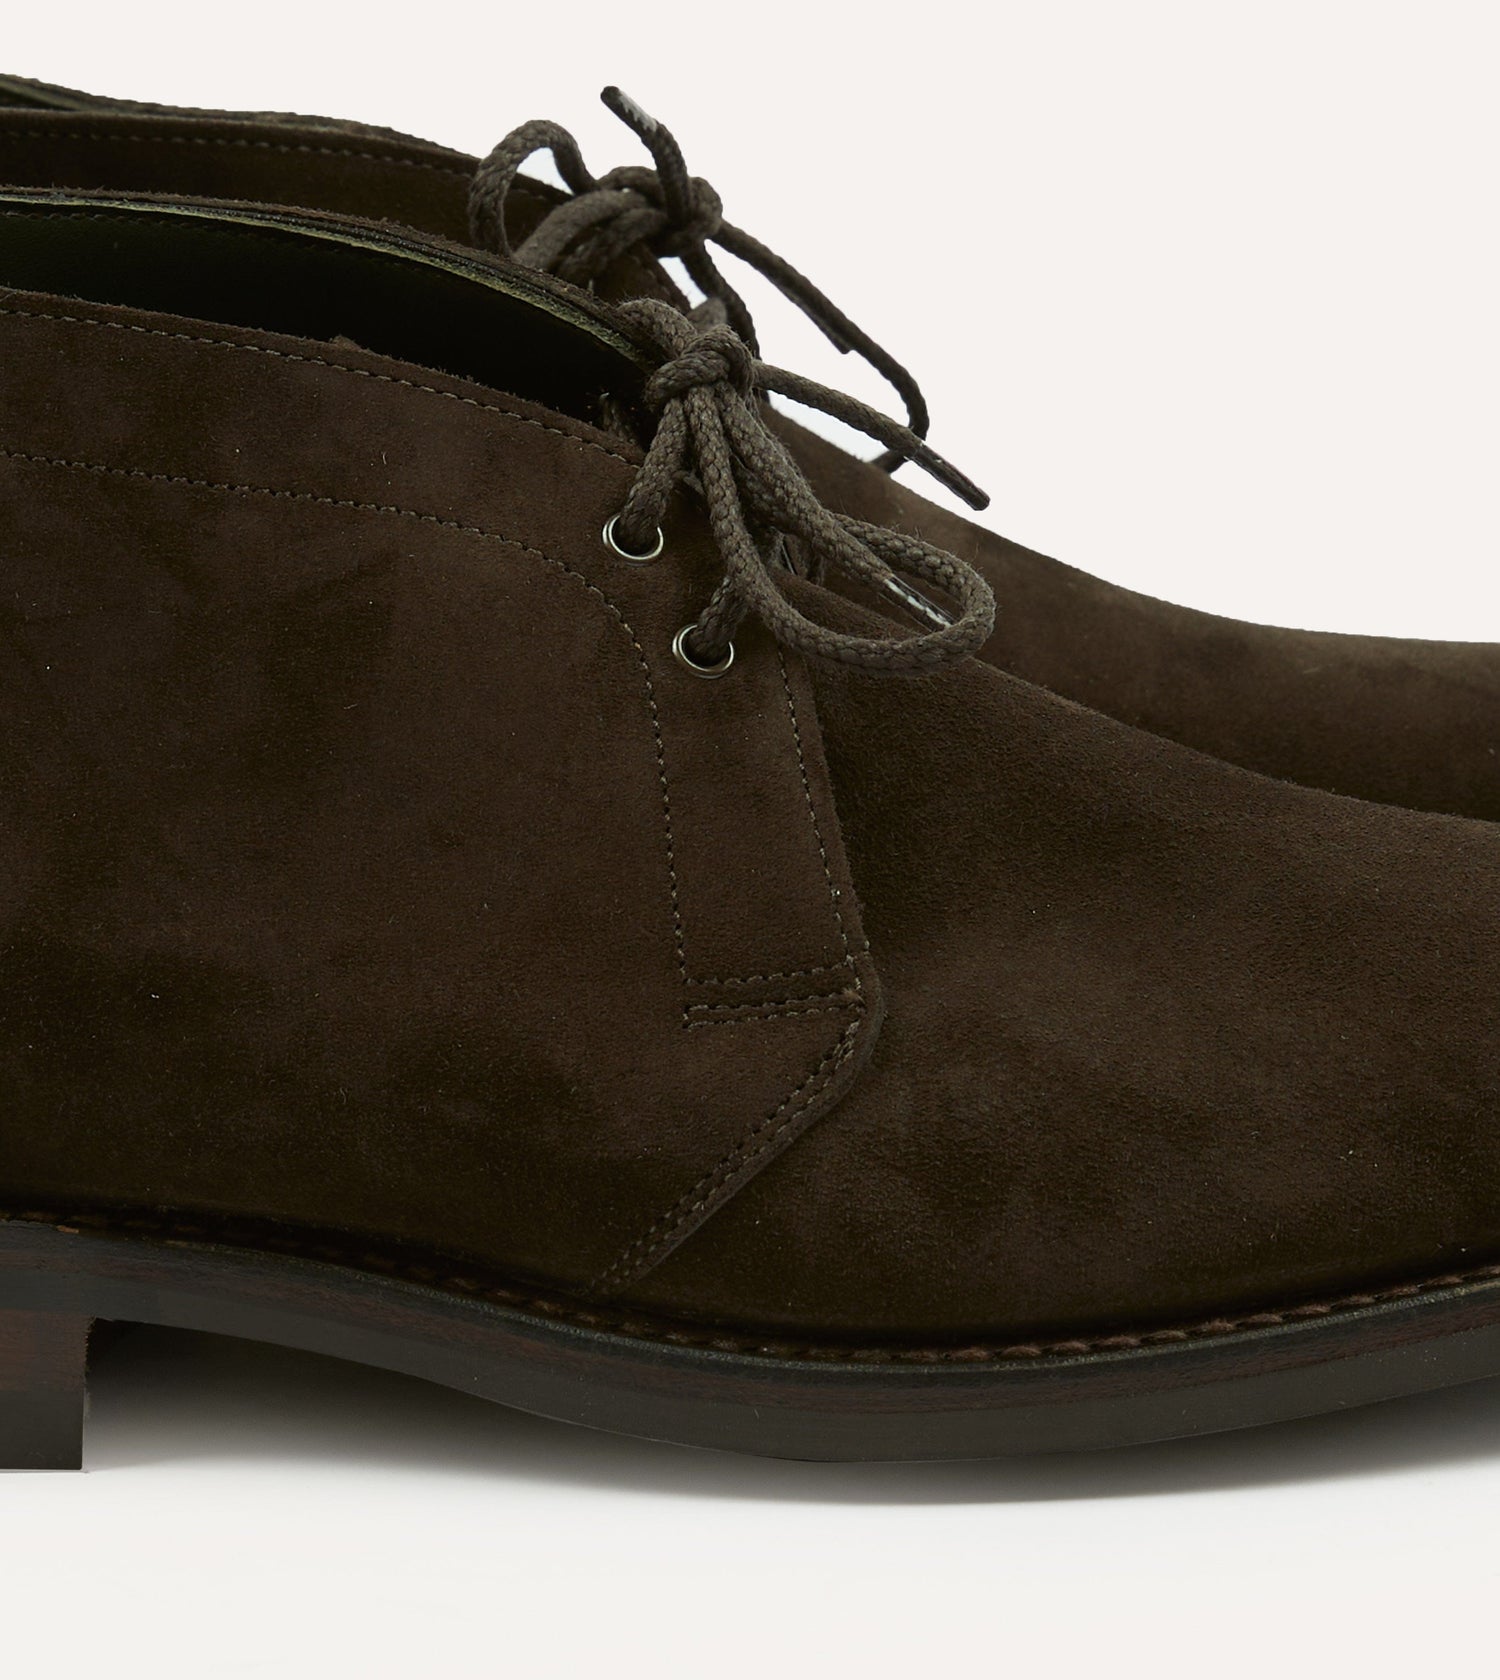 Brown Suede Murphy Goodyear Welted Chukka Boot